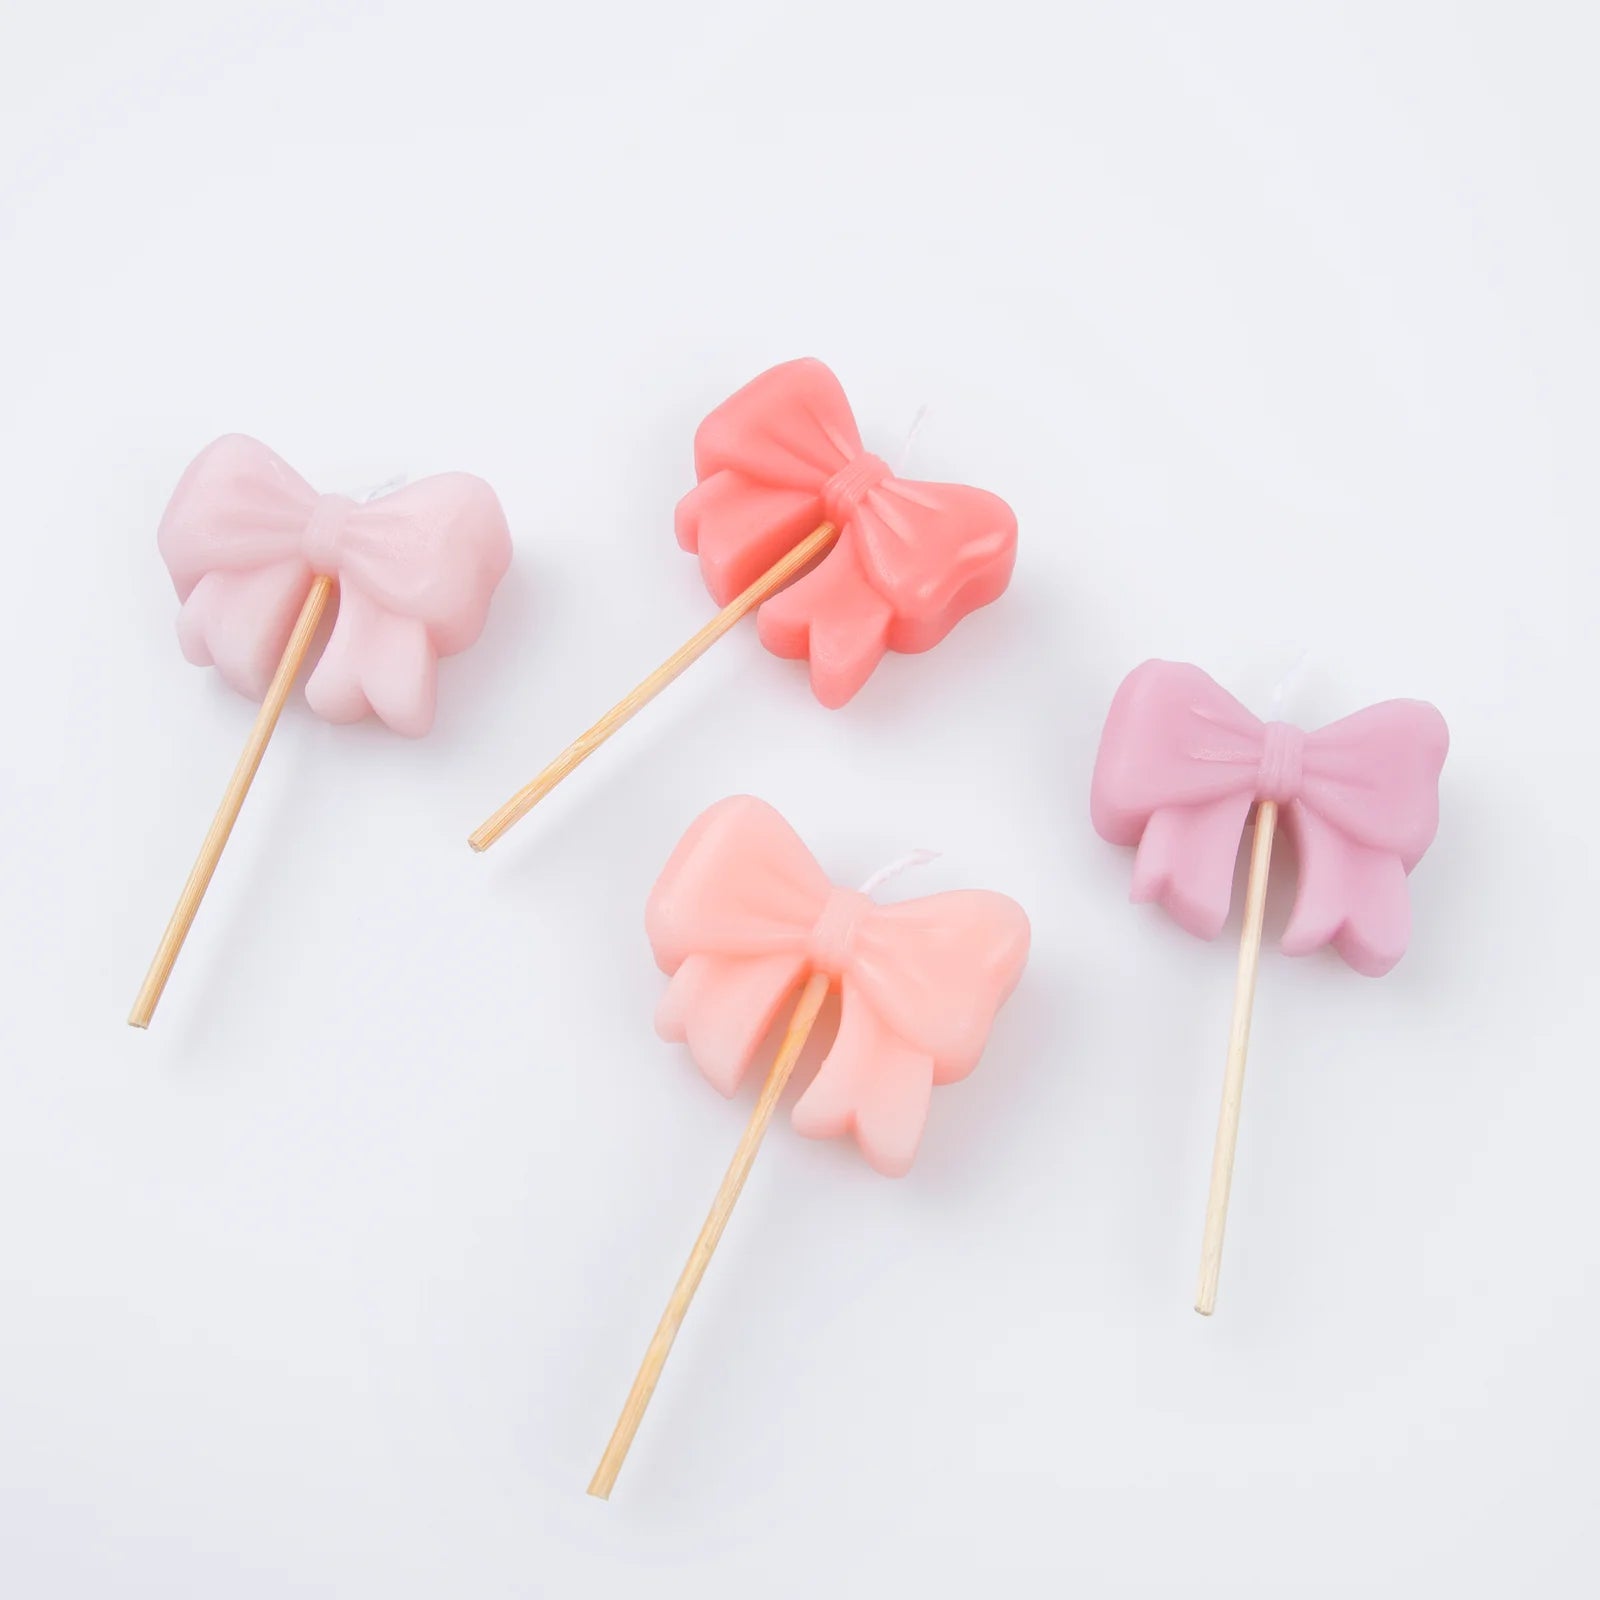 PINK BOW SHAPED CAKE CANDLES